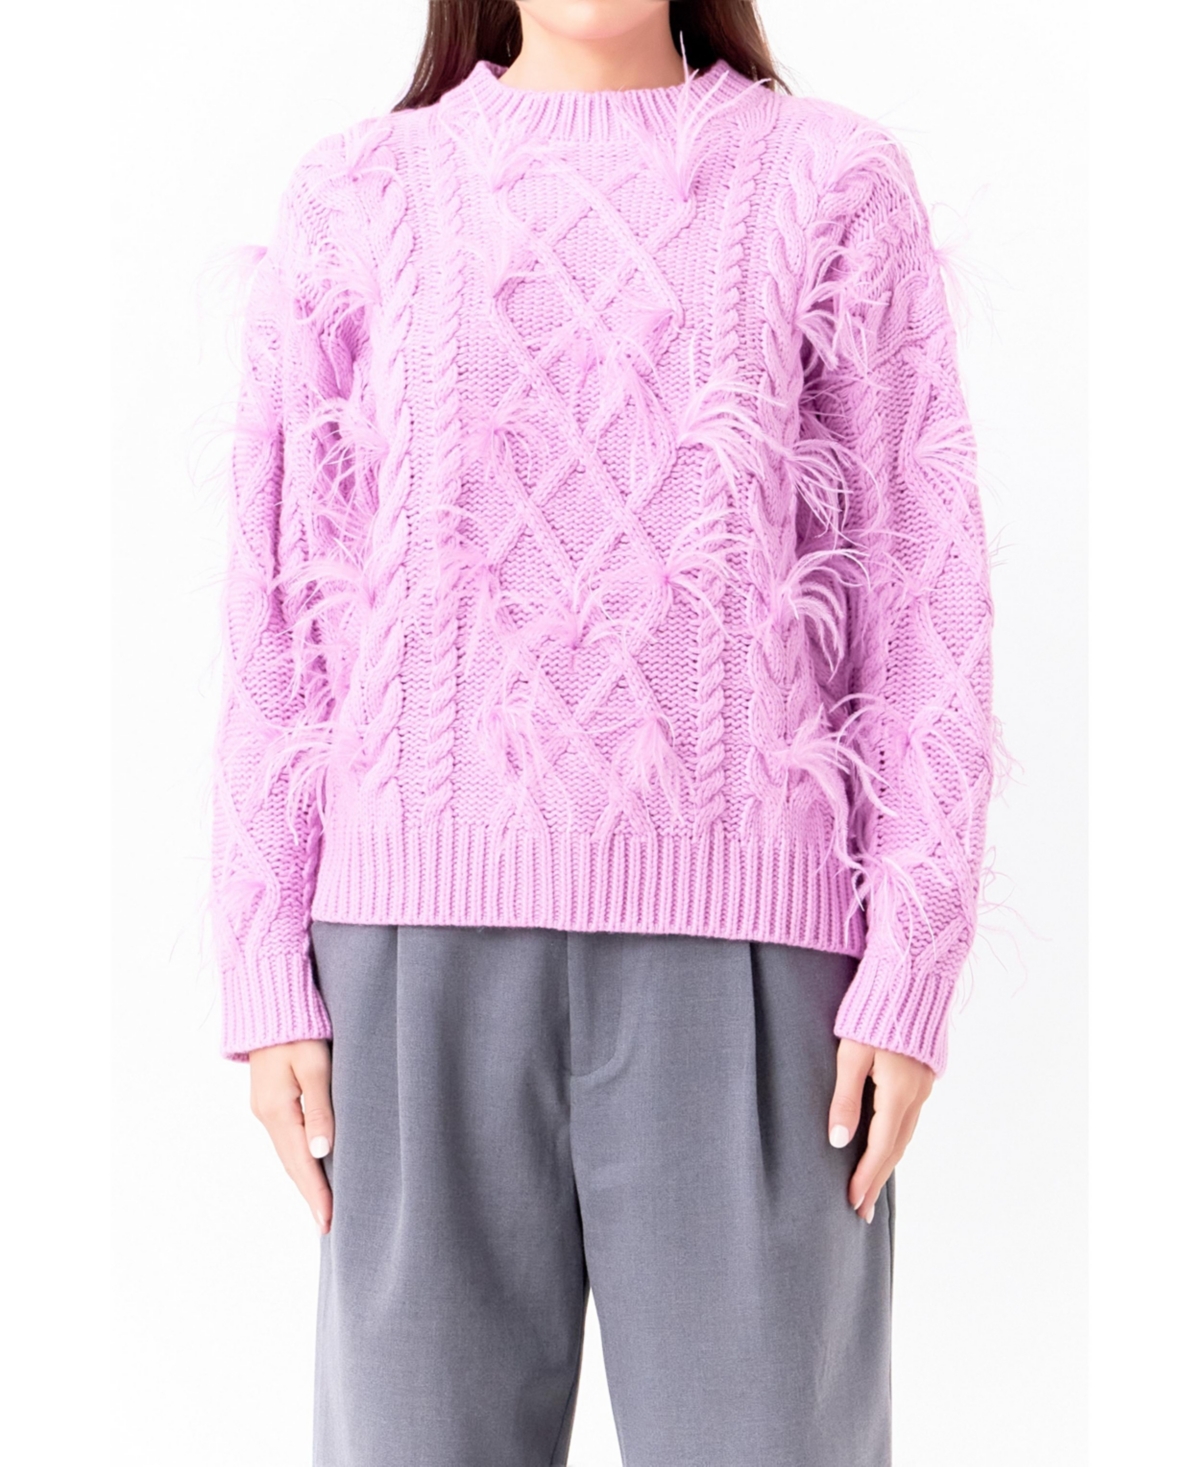 ENDLESS ROSE WOMEN'S FEATHER DETAIL SWEATER